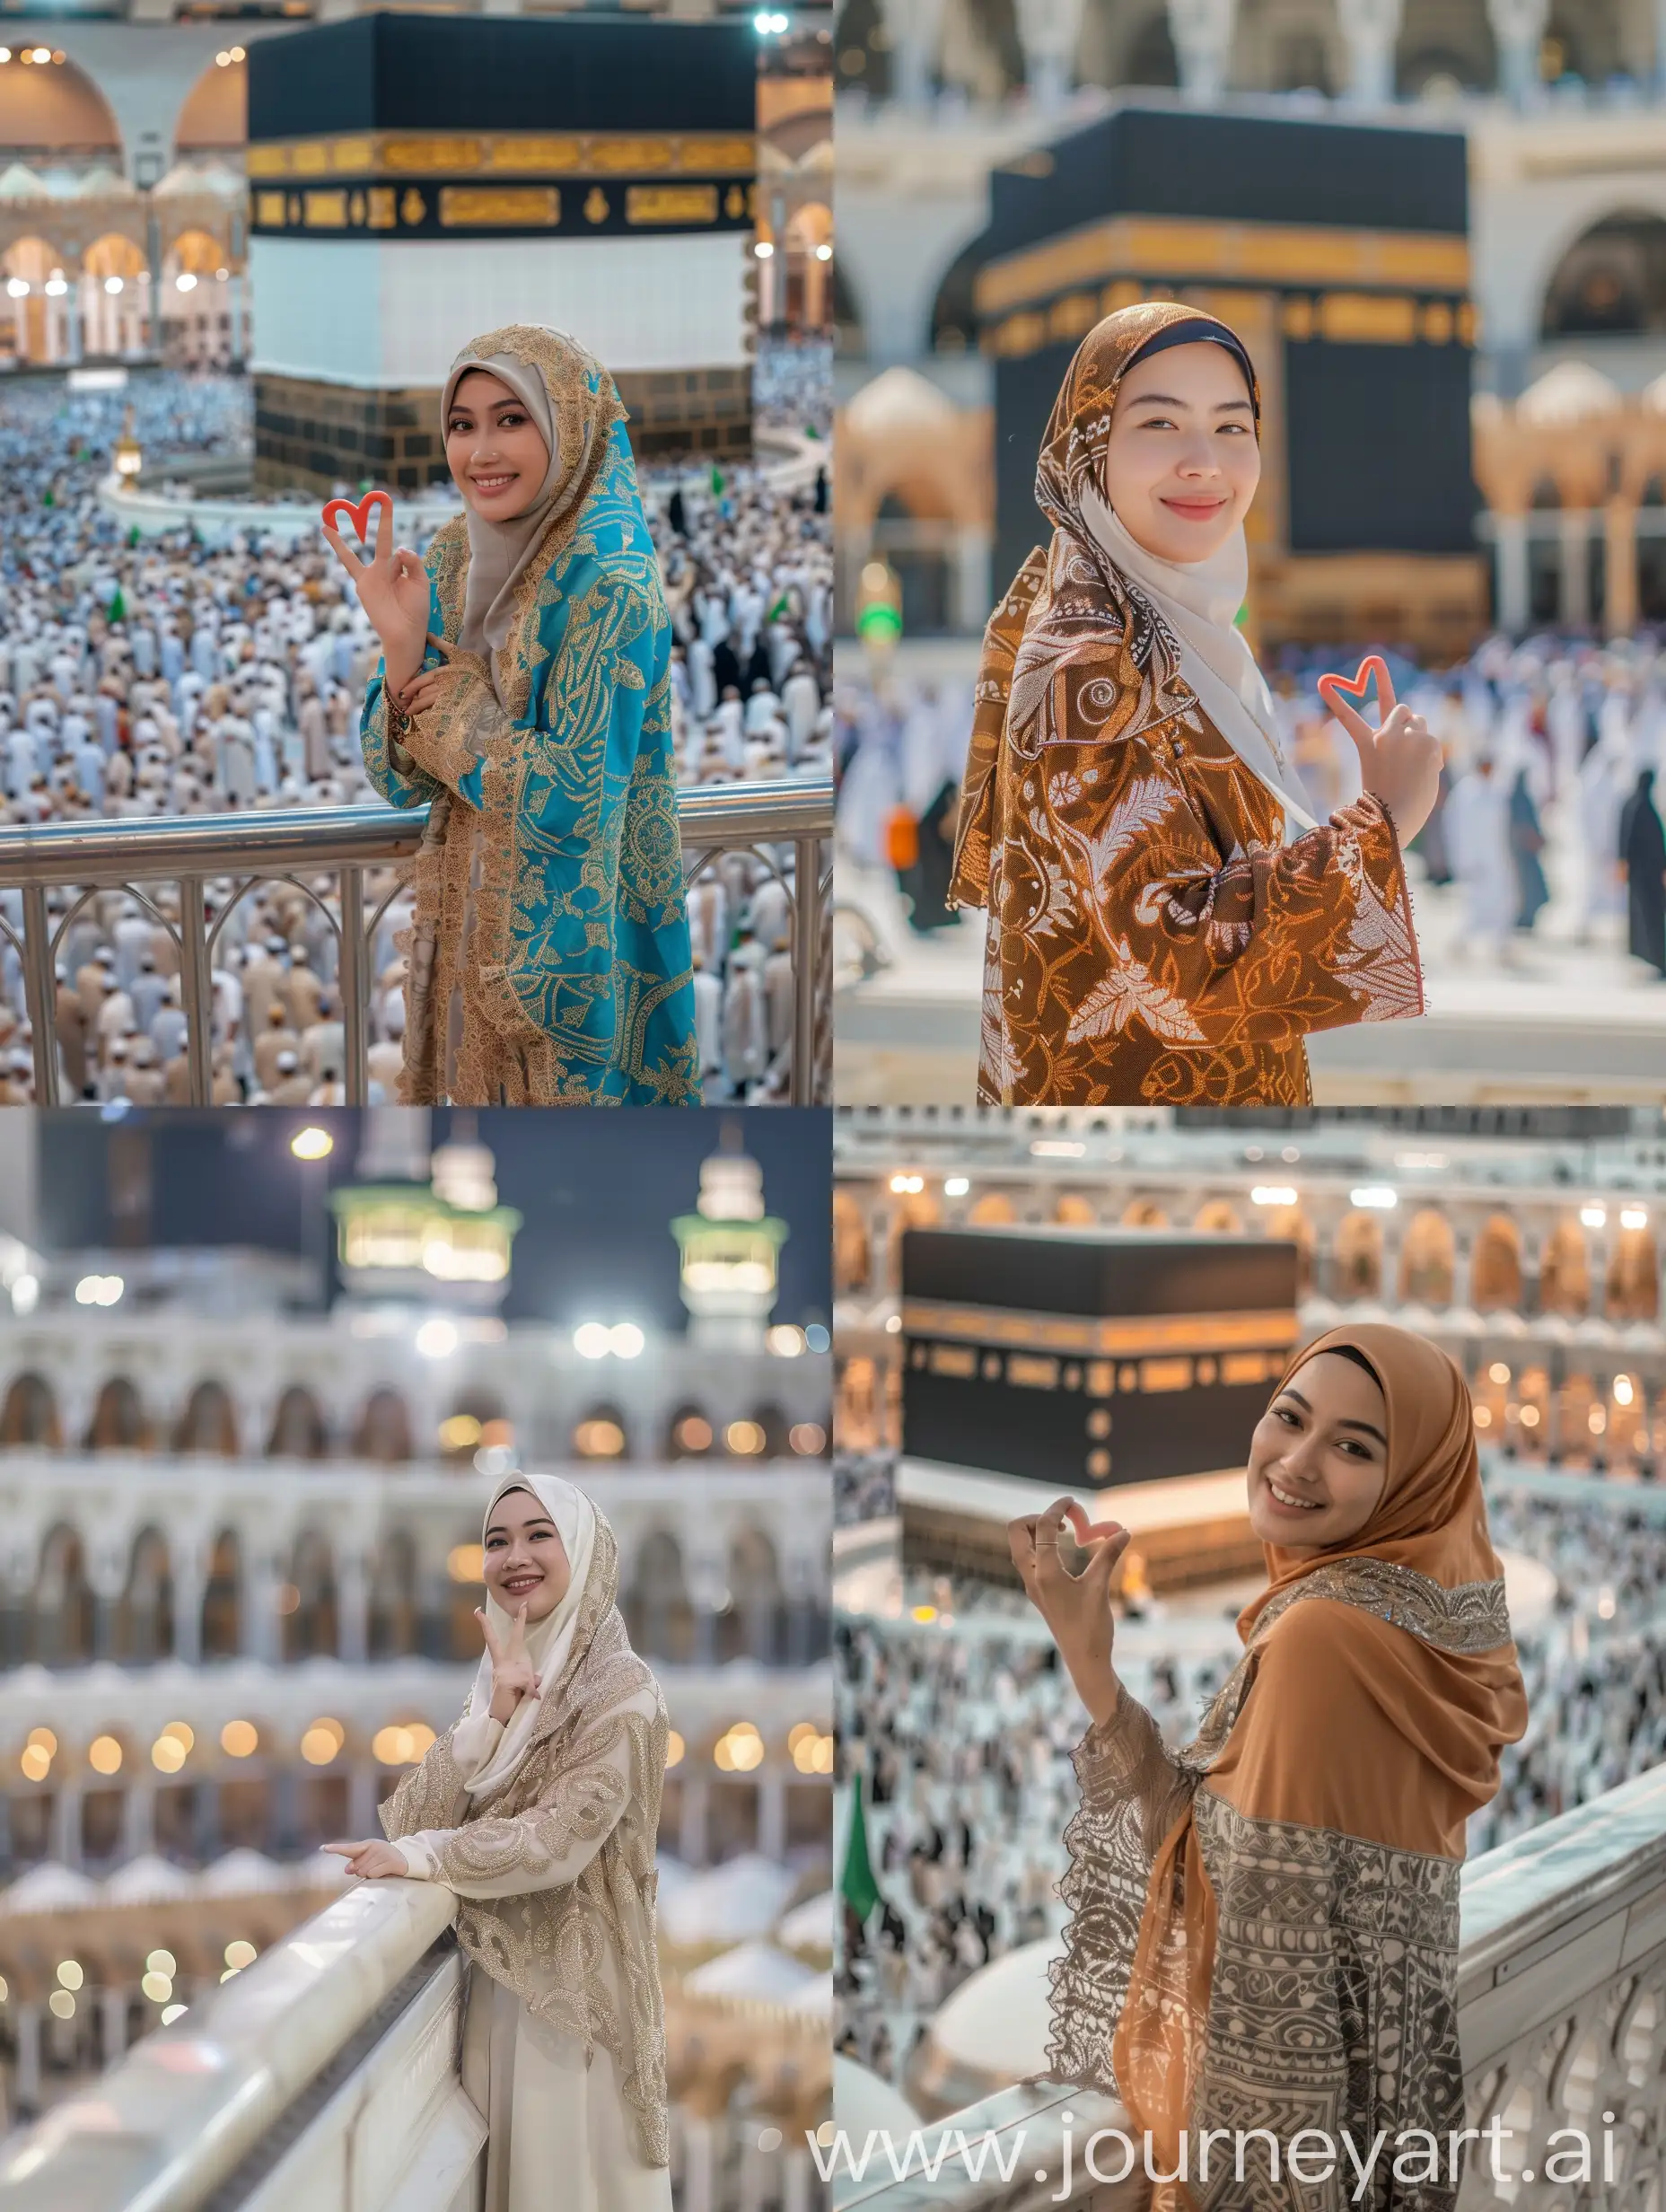 Moslem-Woman-Posing-with-Heart-Sign-at-Kaaba-Cultural-Expression-in-High-Resolution